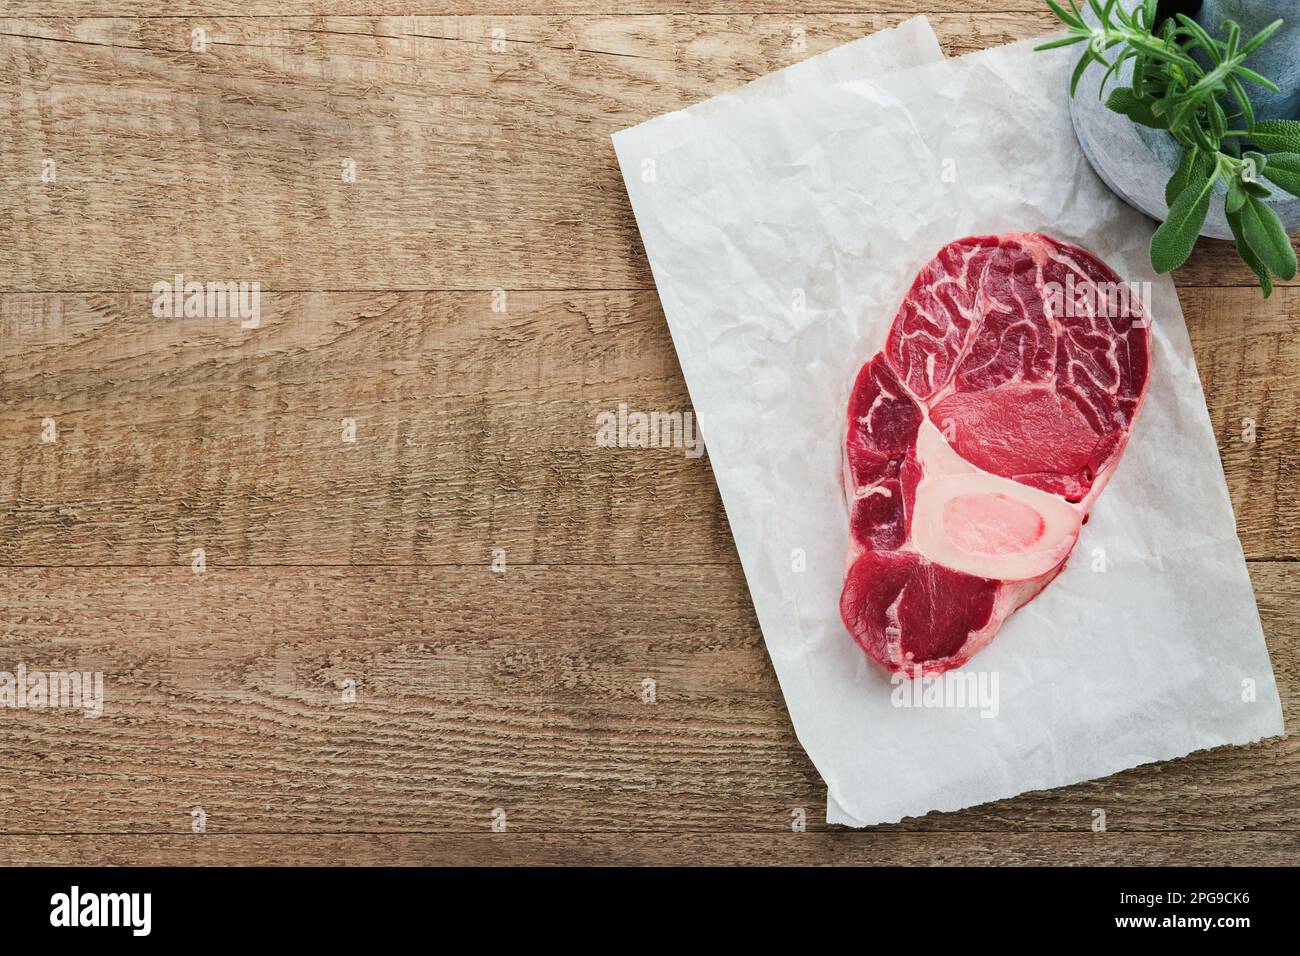 Osso Buco raw steak meat. Barbecue meat. Raw fresh cross cut veal shank and seasonings pepper, rosemary, thyme and salt on old wooden background. Beef Stock Photo